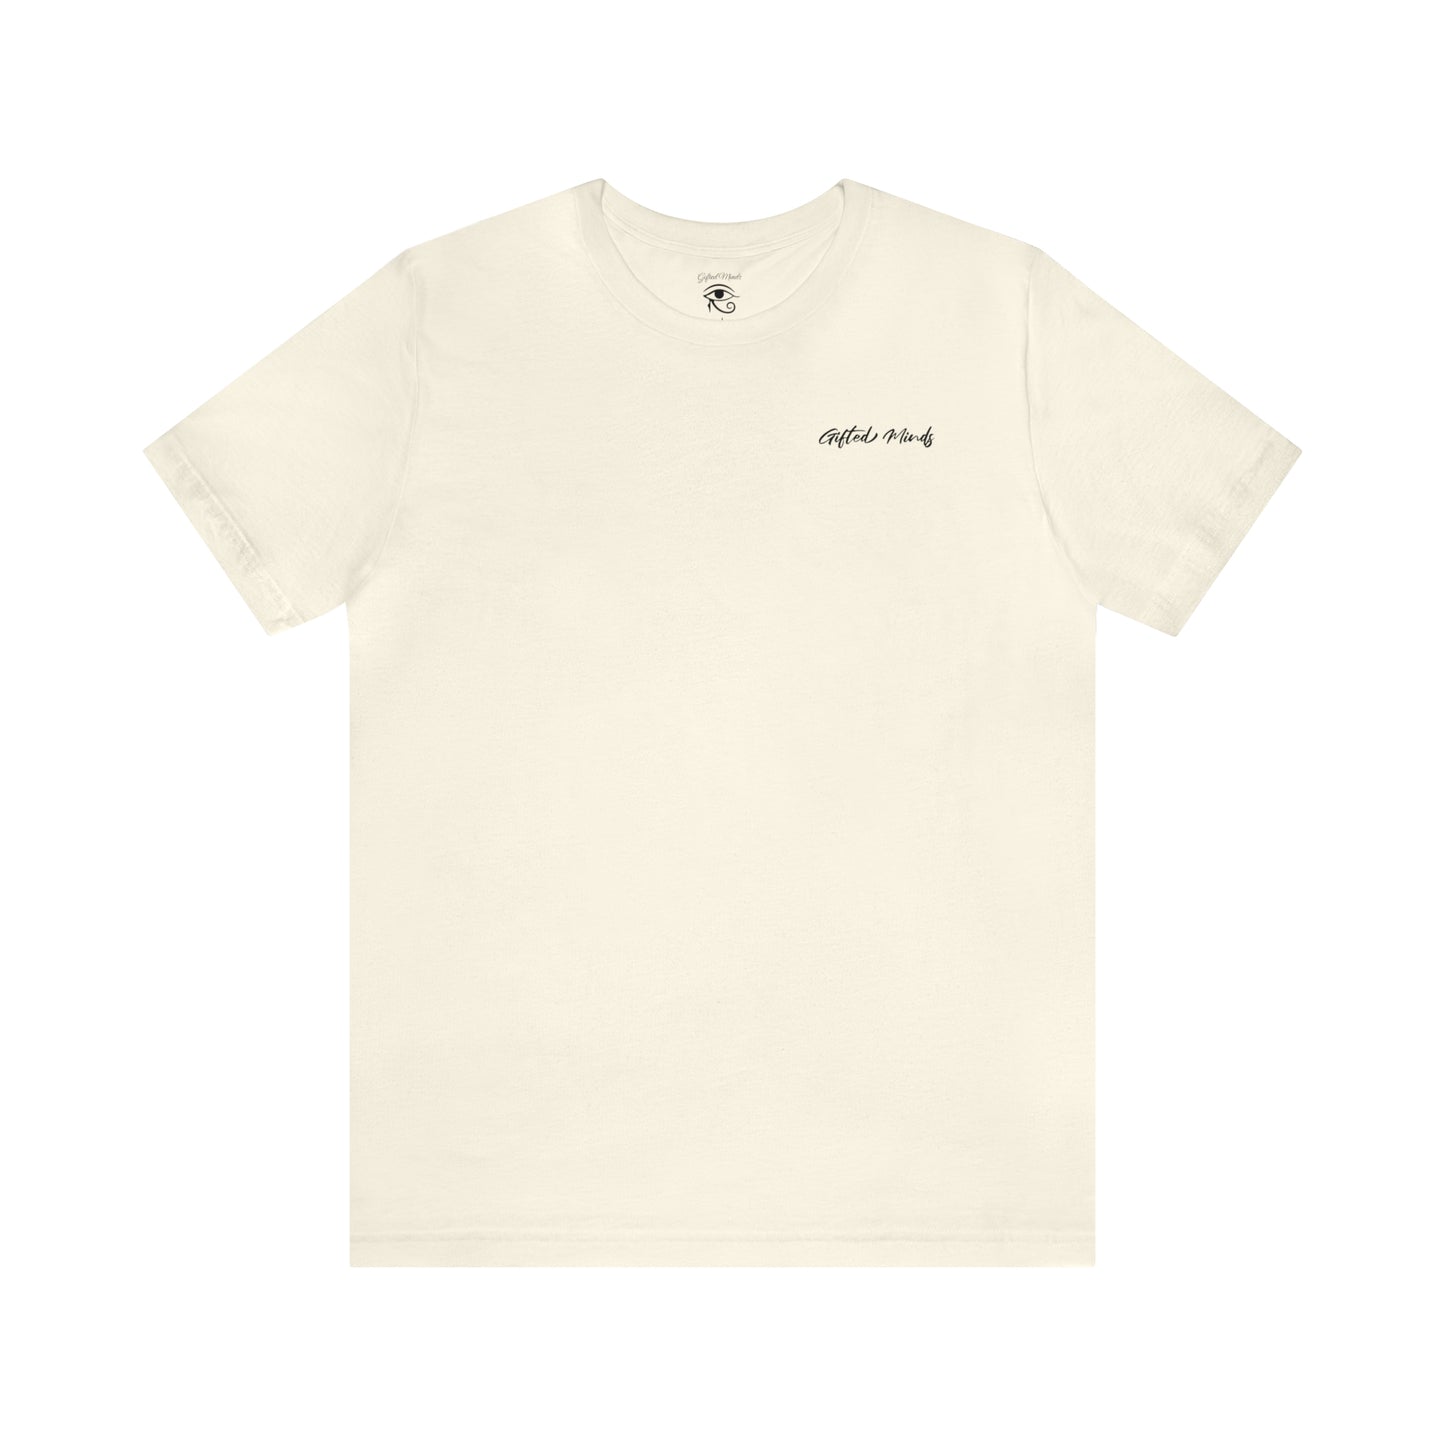 Positive Thoughts Grow Short Sleeve Tee - GFTD MNDS